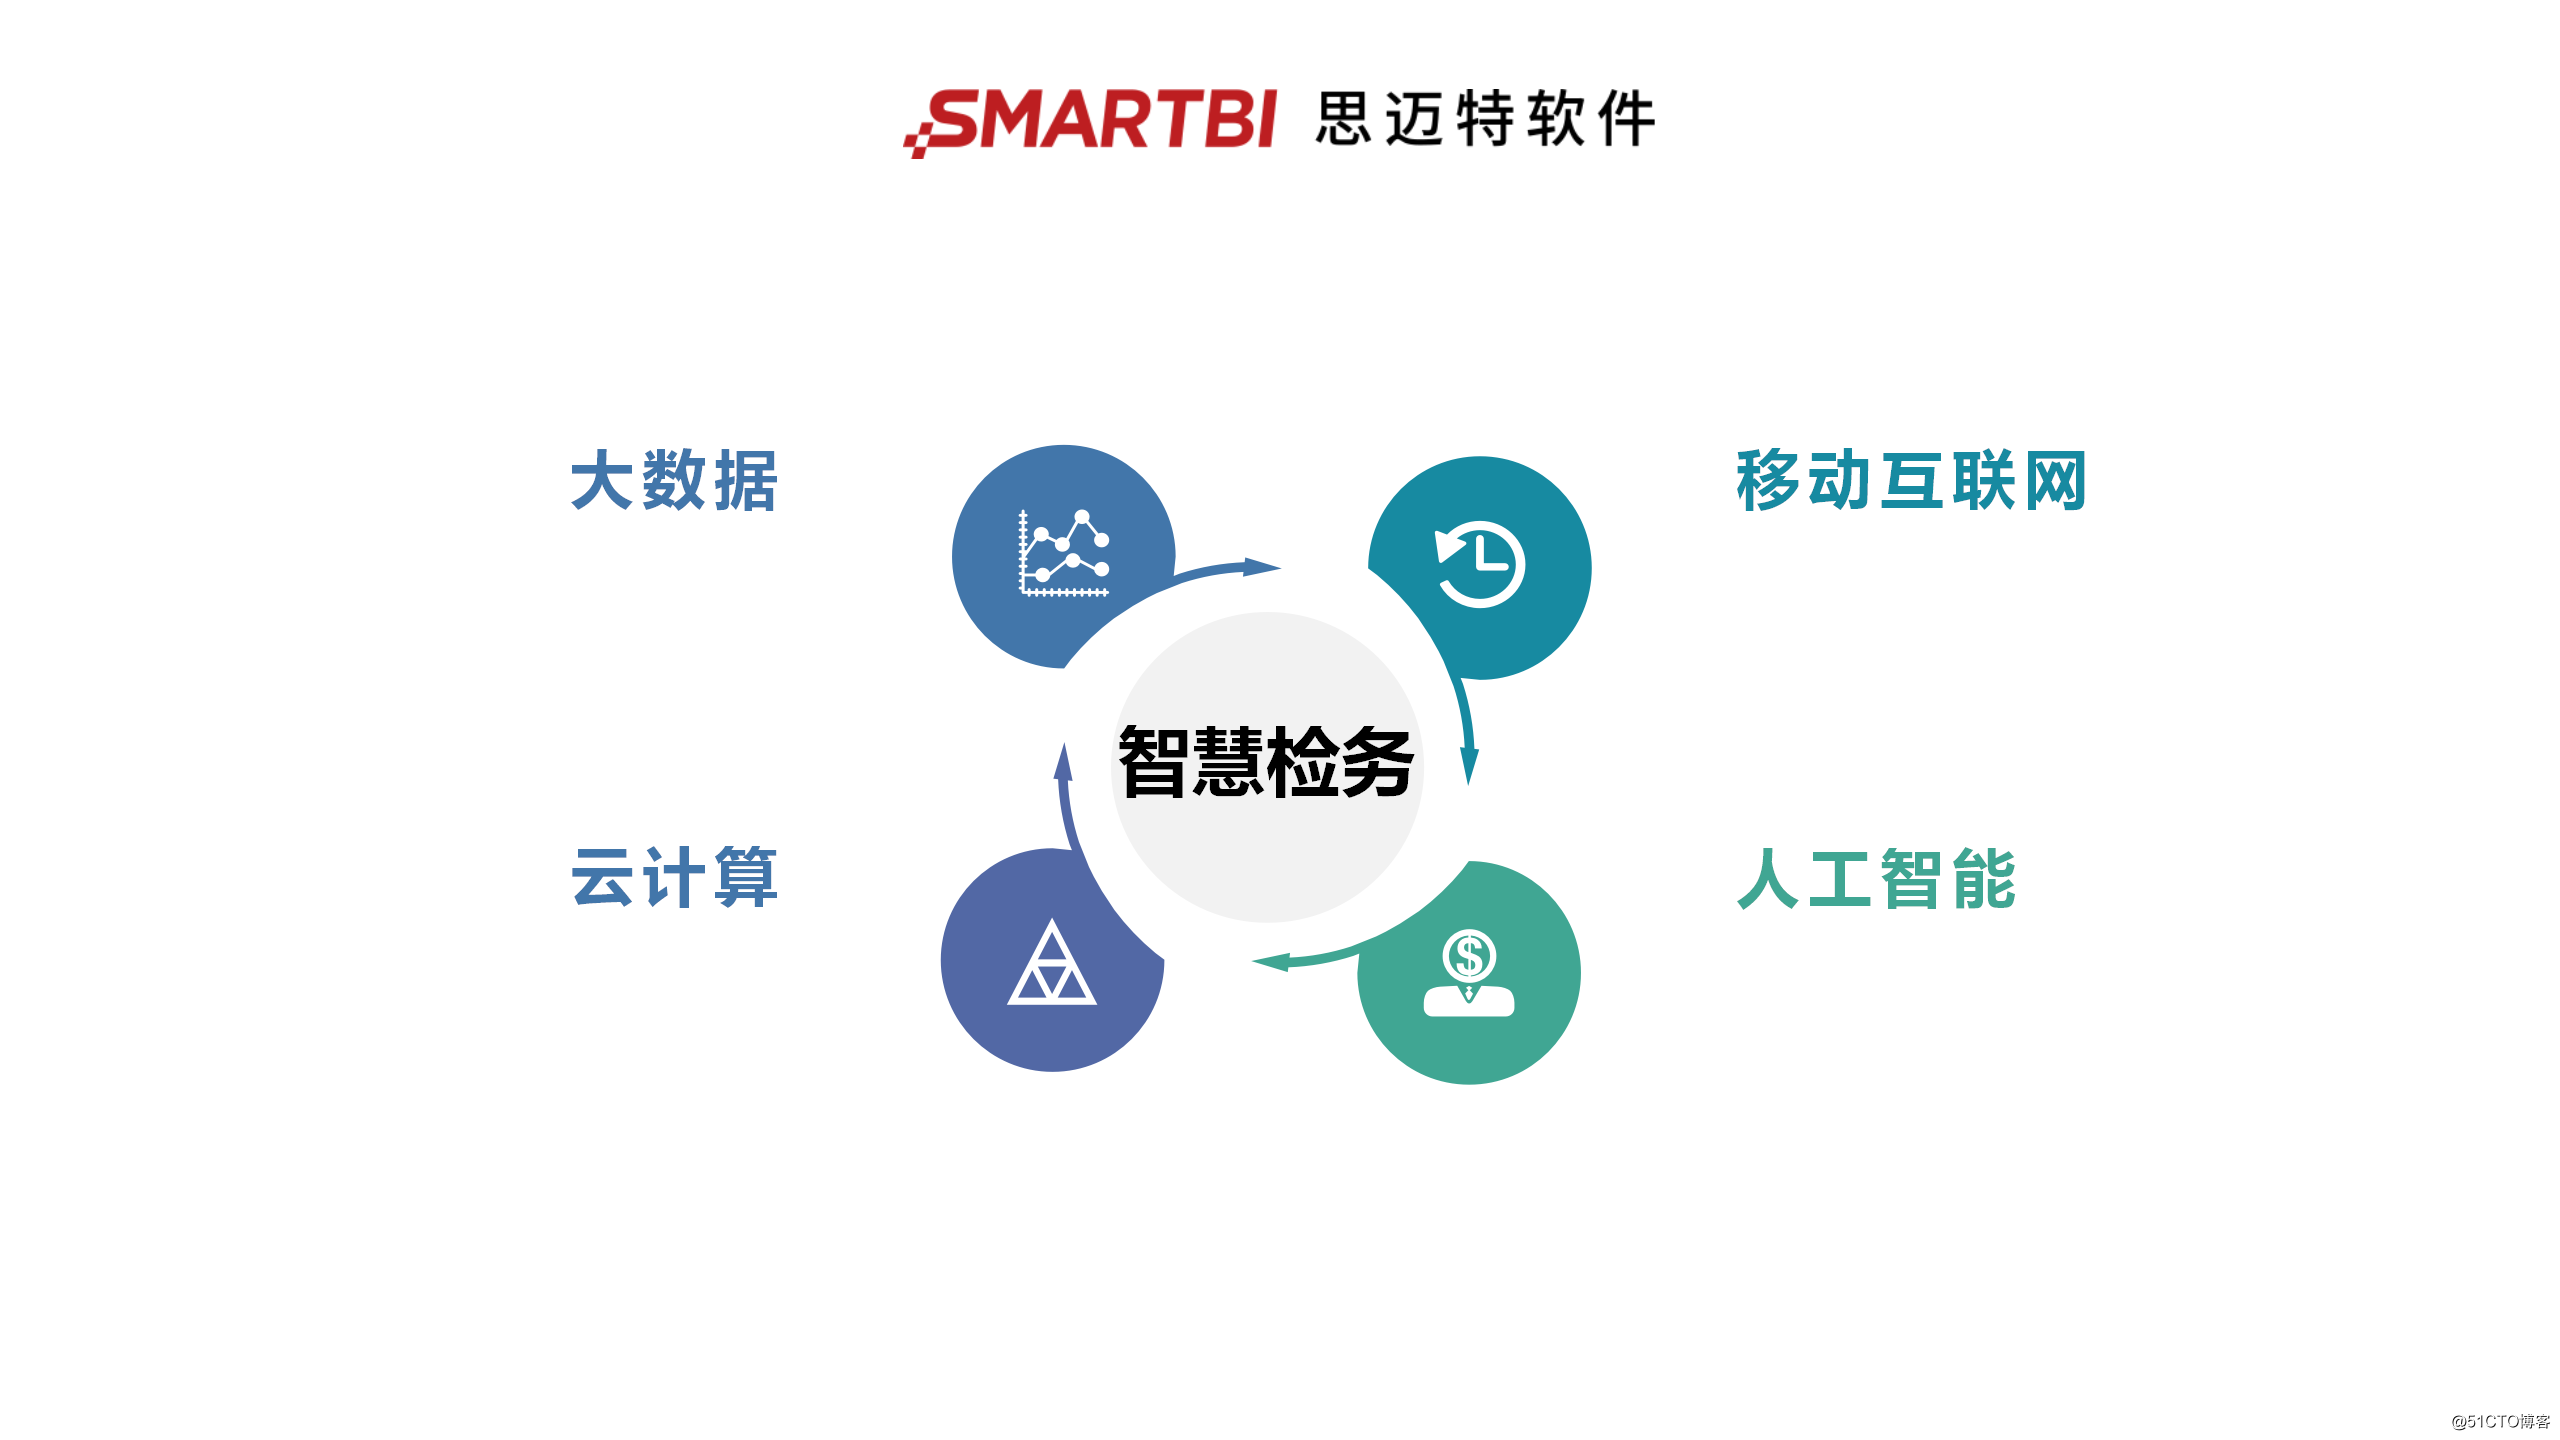 How does the "most powerful brain" smart prosecution work?  Smartbi a set of best practice case, do not Come to learn!